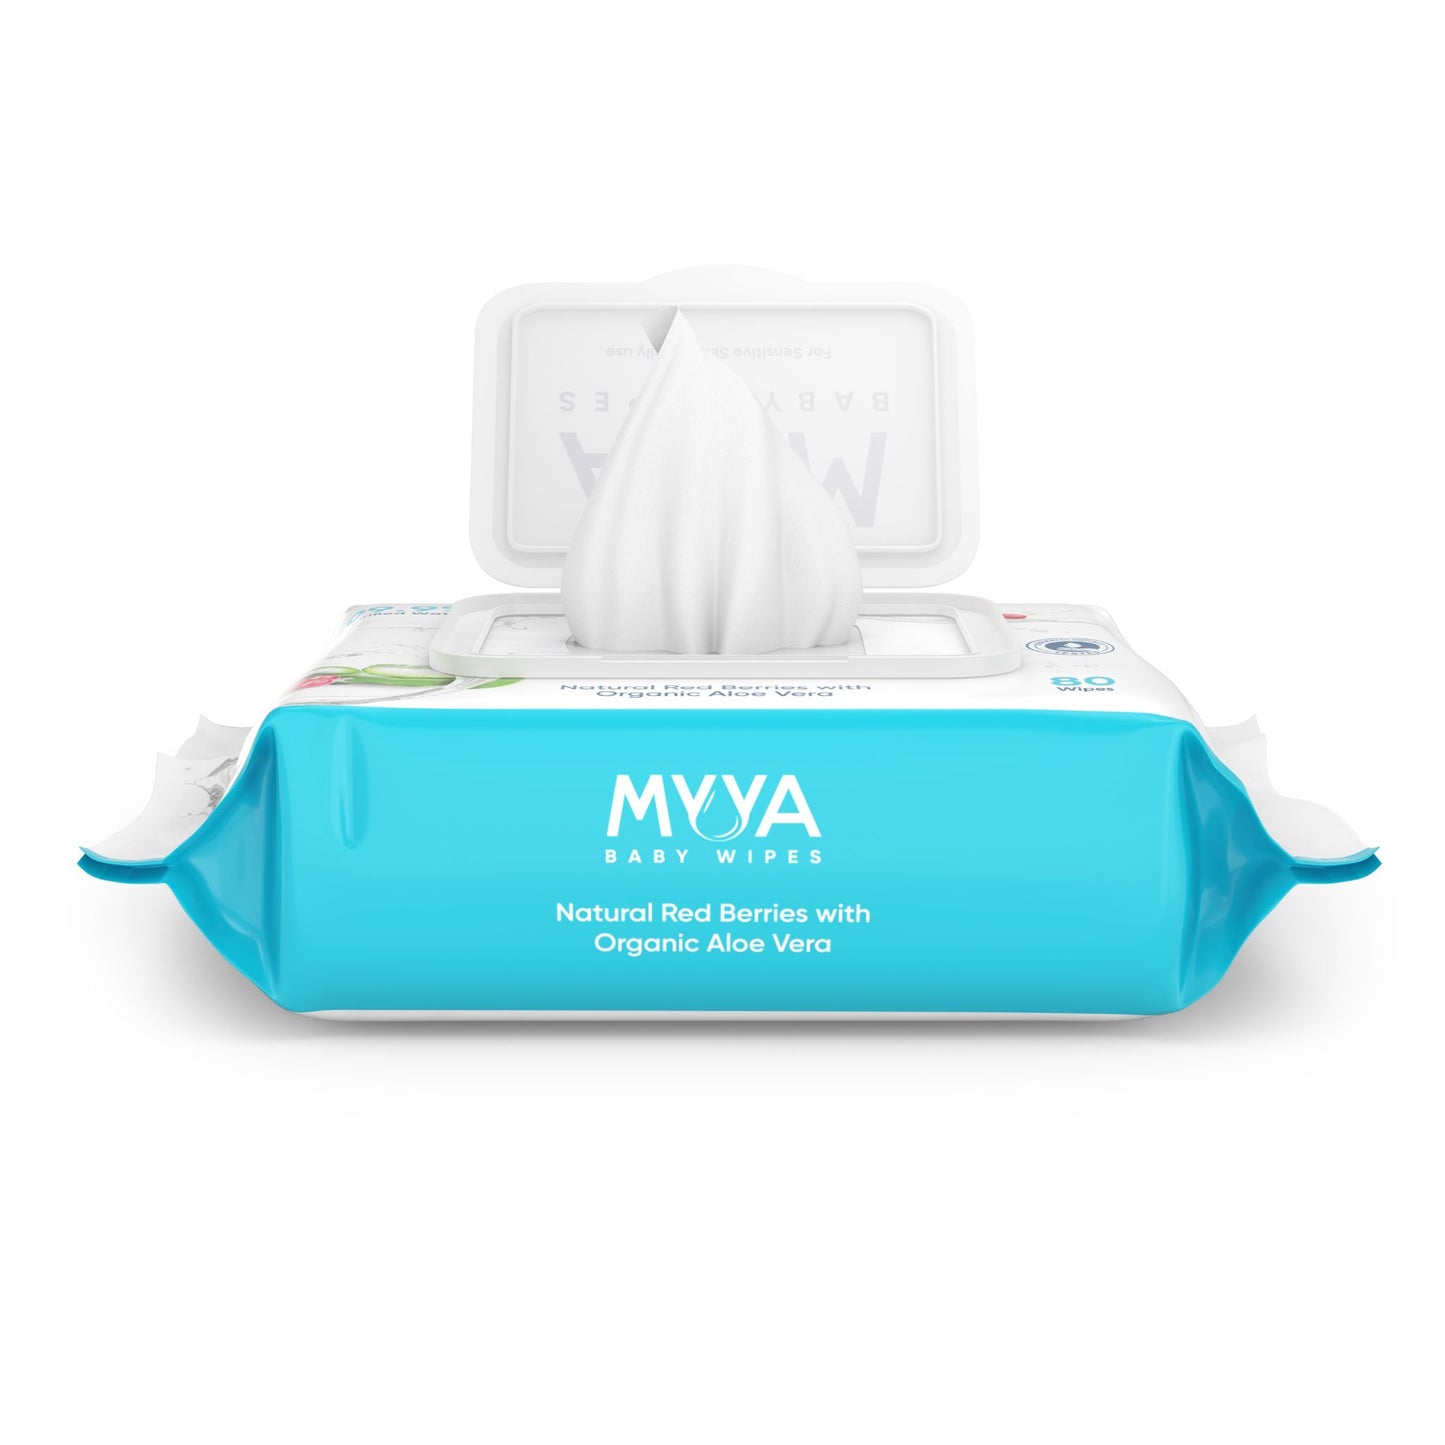 Myya Baby Wipes: 80 Sheet Pack for Delicate Skin